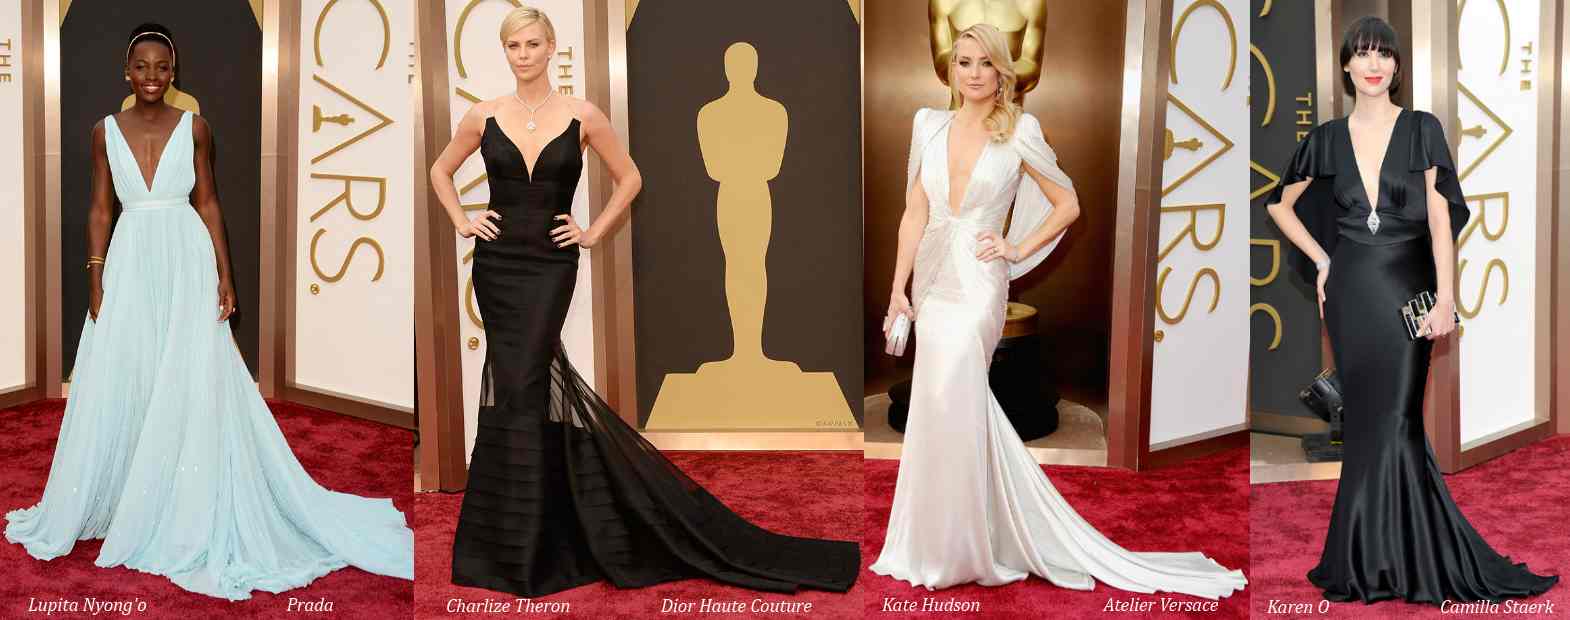 Oscars Red Carpet: The Best-Dressed Celebrities of 2014 | Glamour